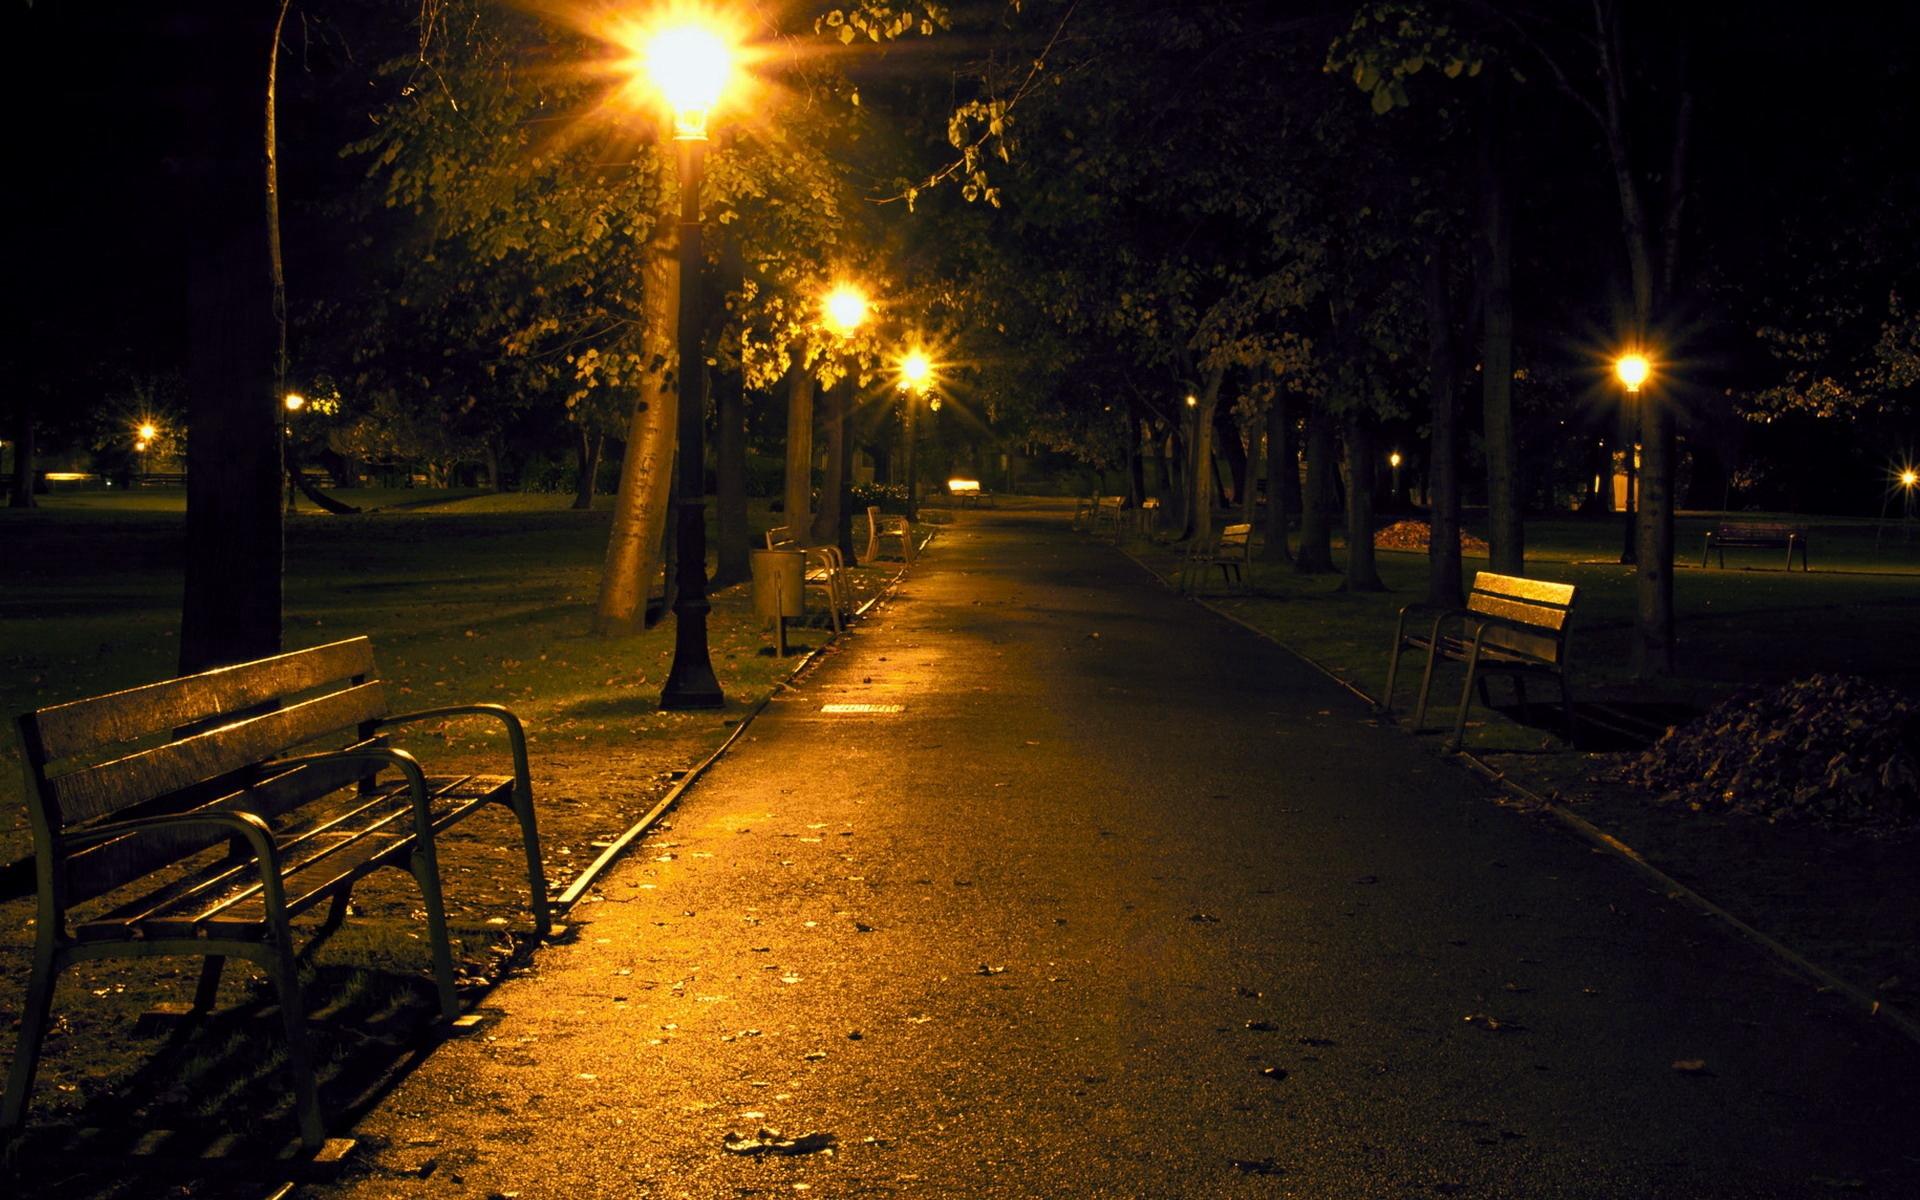 Download wallpaper 1920x1200 city, night, park, benches HD